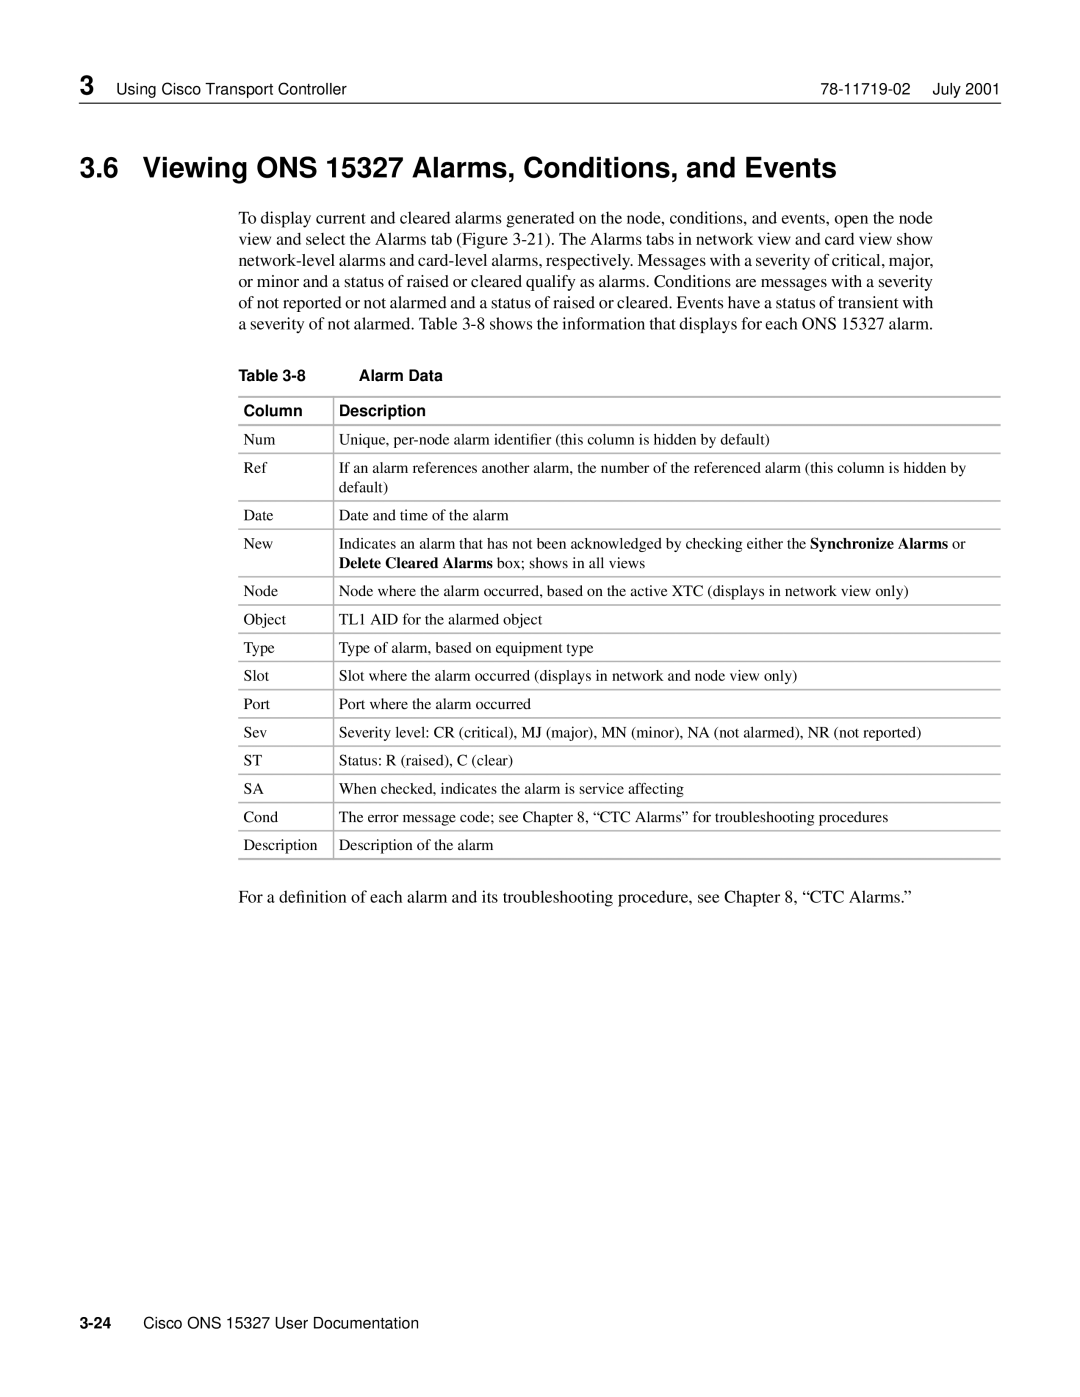 Cisco Systems manual Viewing ONS 15327 Alarms, Conditions, and Events, Alarm Data, Column, Description 